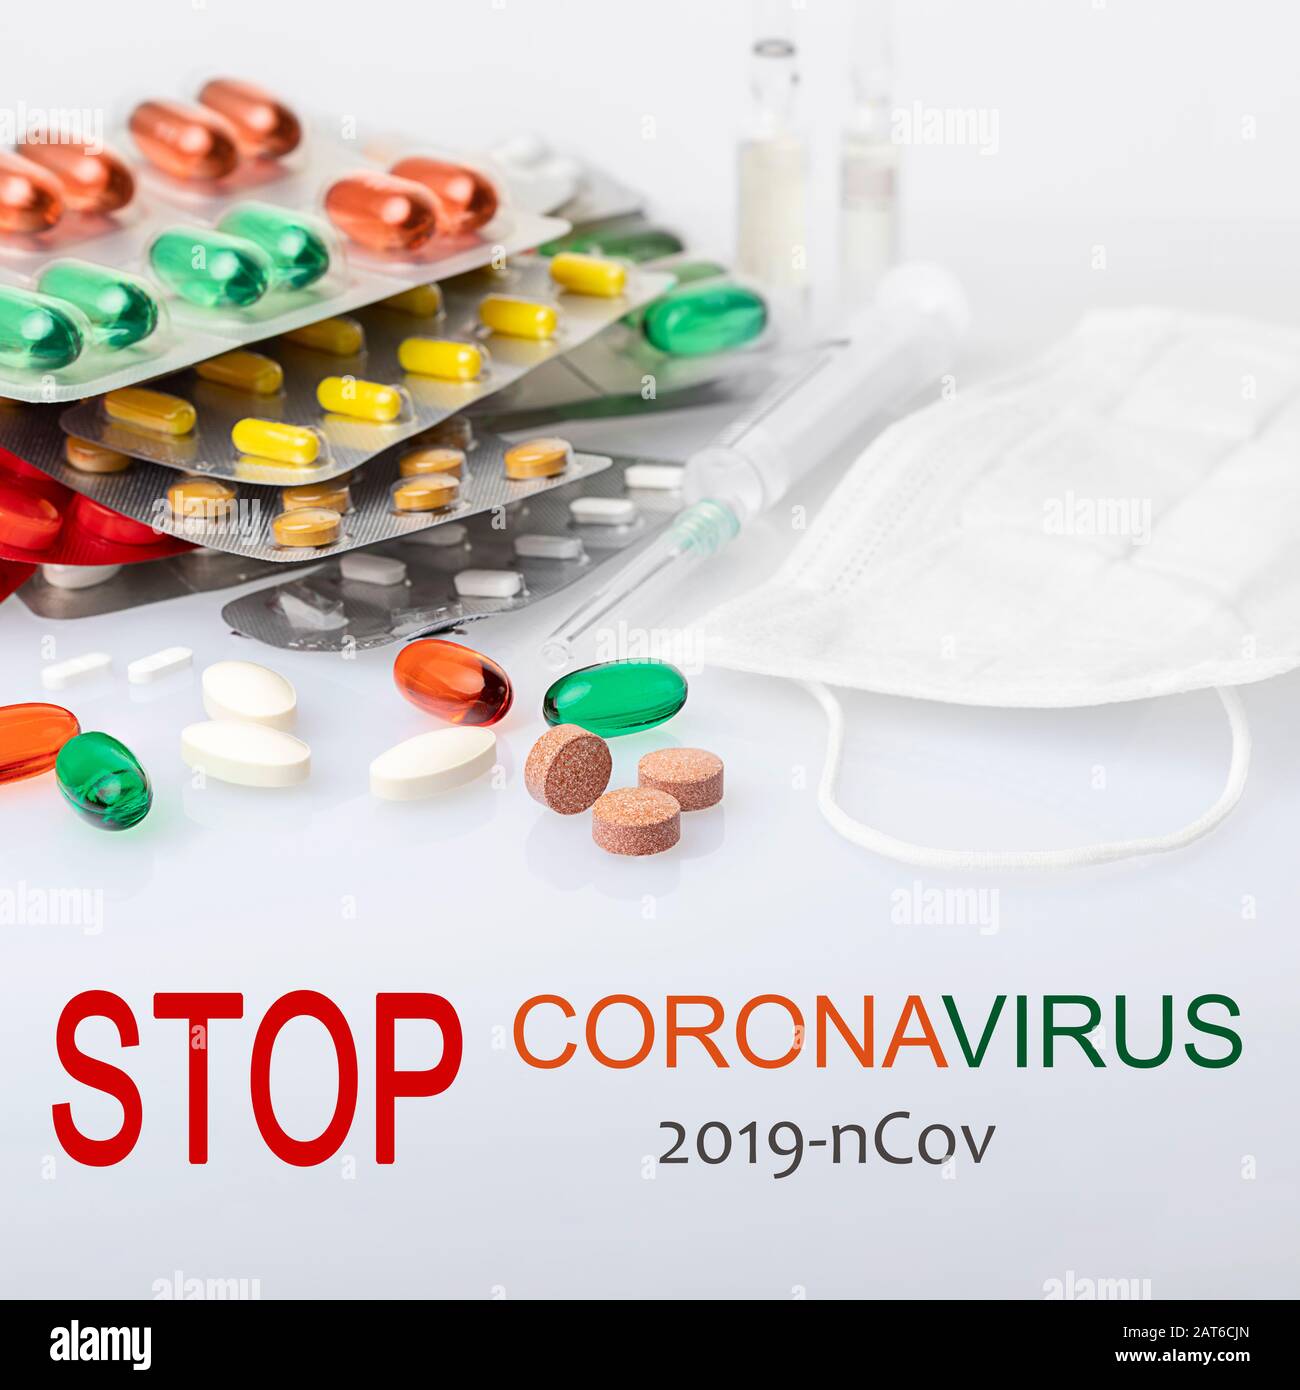 Coronavirus treatment concept. Assorted pharmaceutical medicine pills, tablets, capsules, surgical mask protective mask, ampoules. and plastic syringe Stock Photo